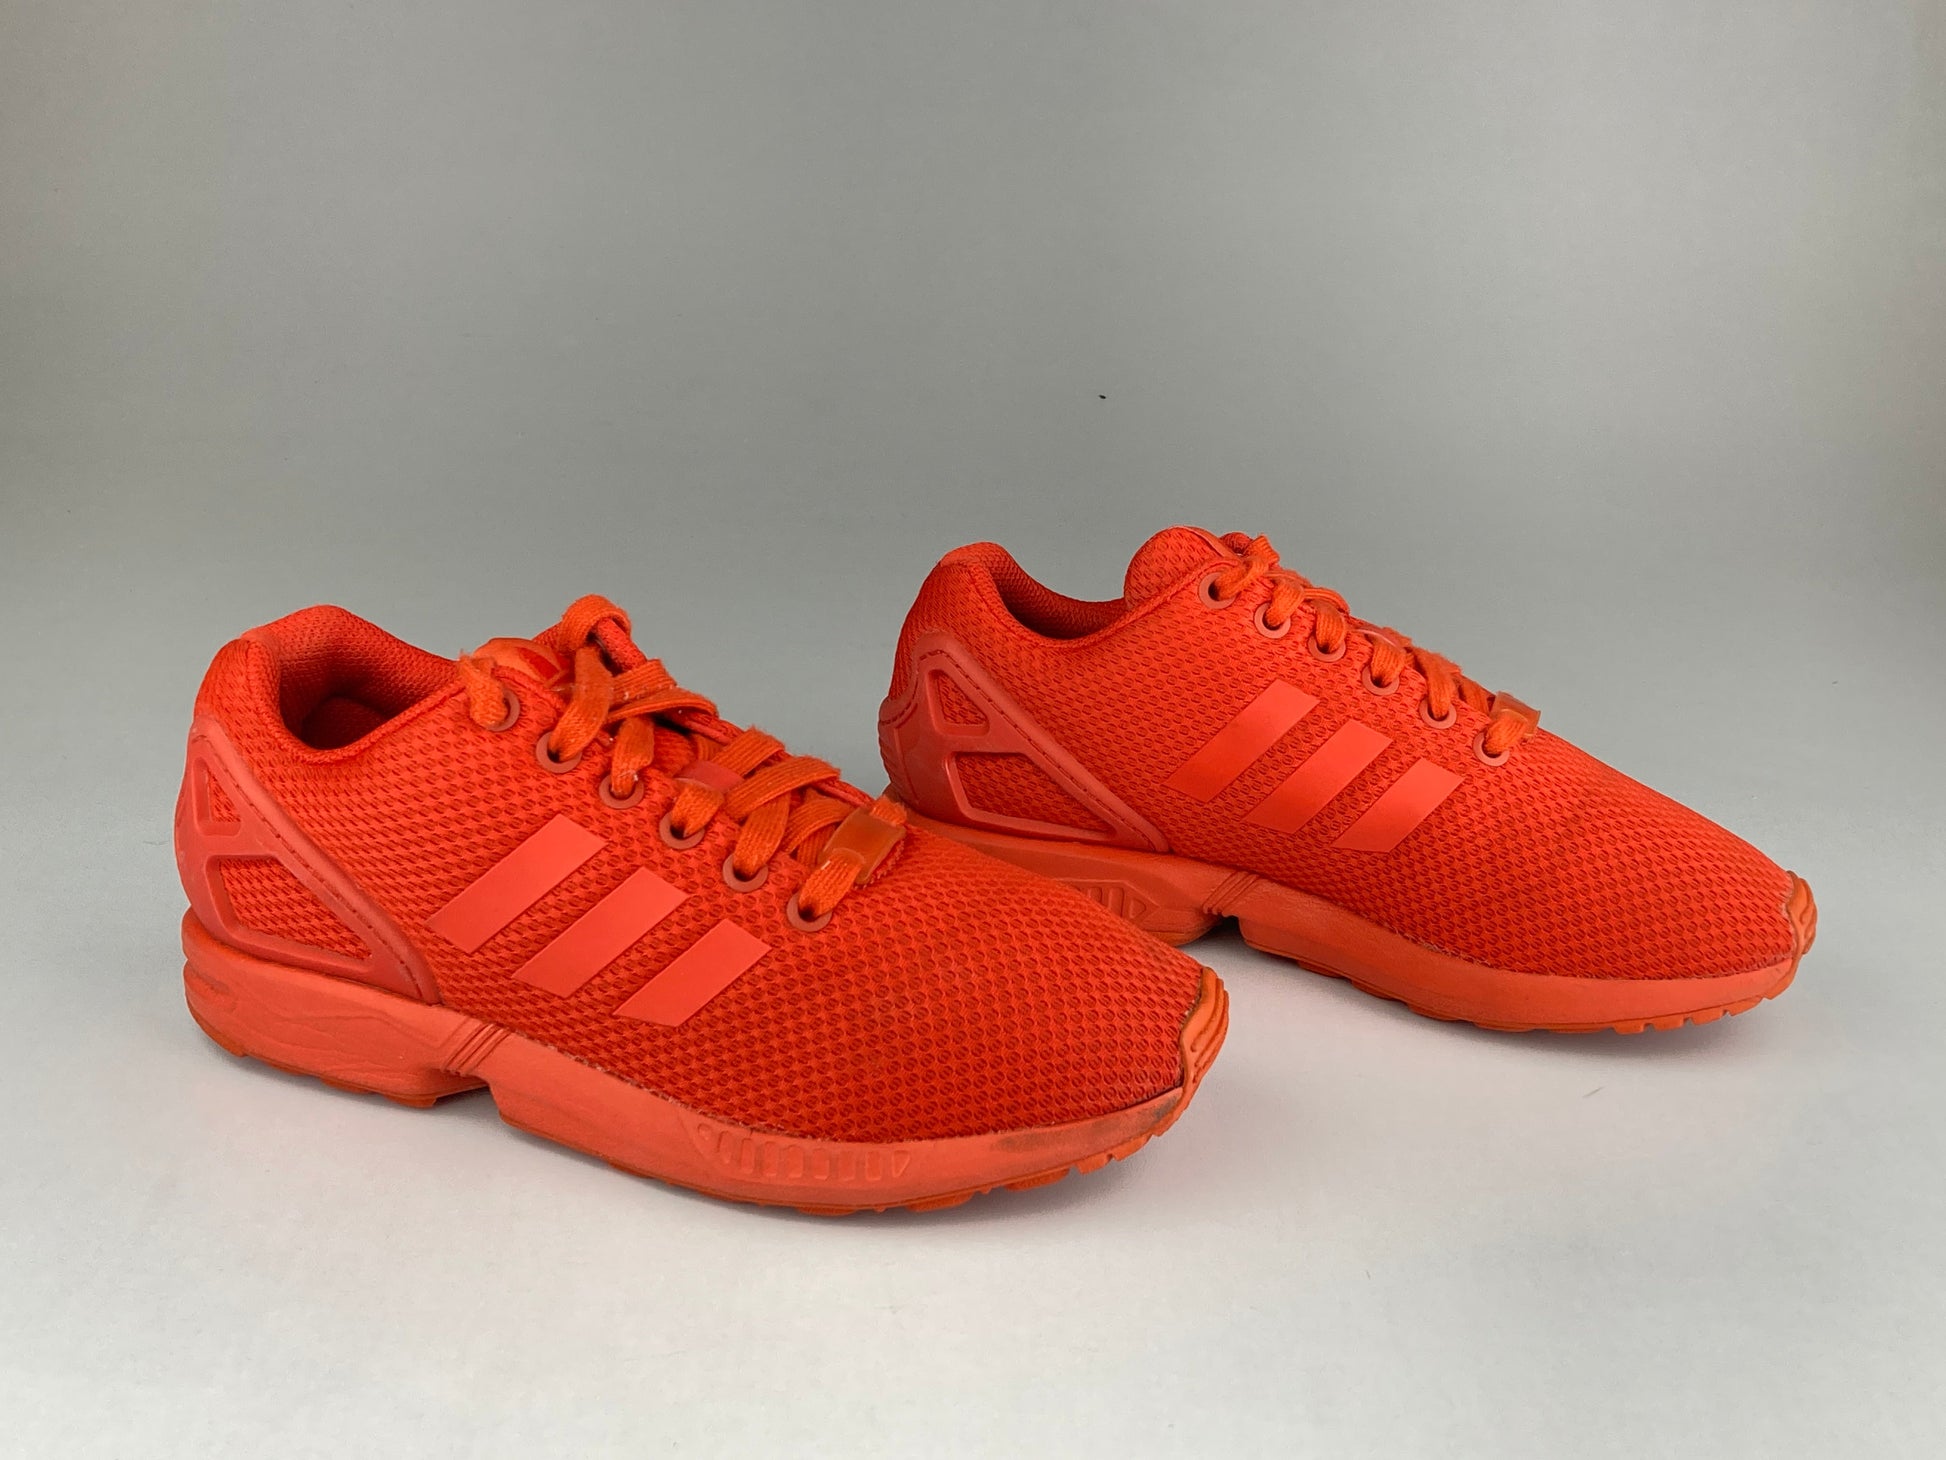 adidas ZX Flux 'All Red' s77299